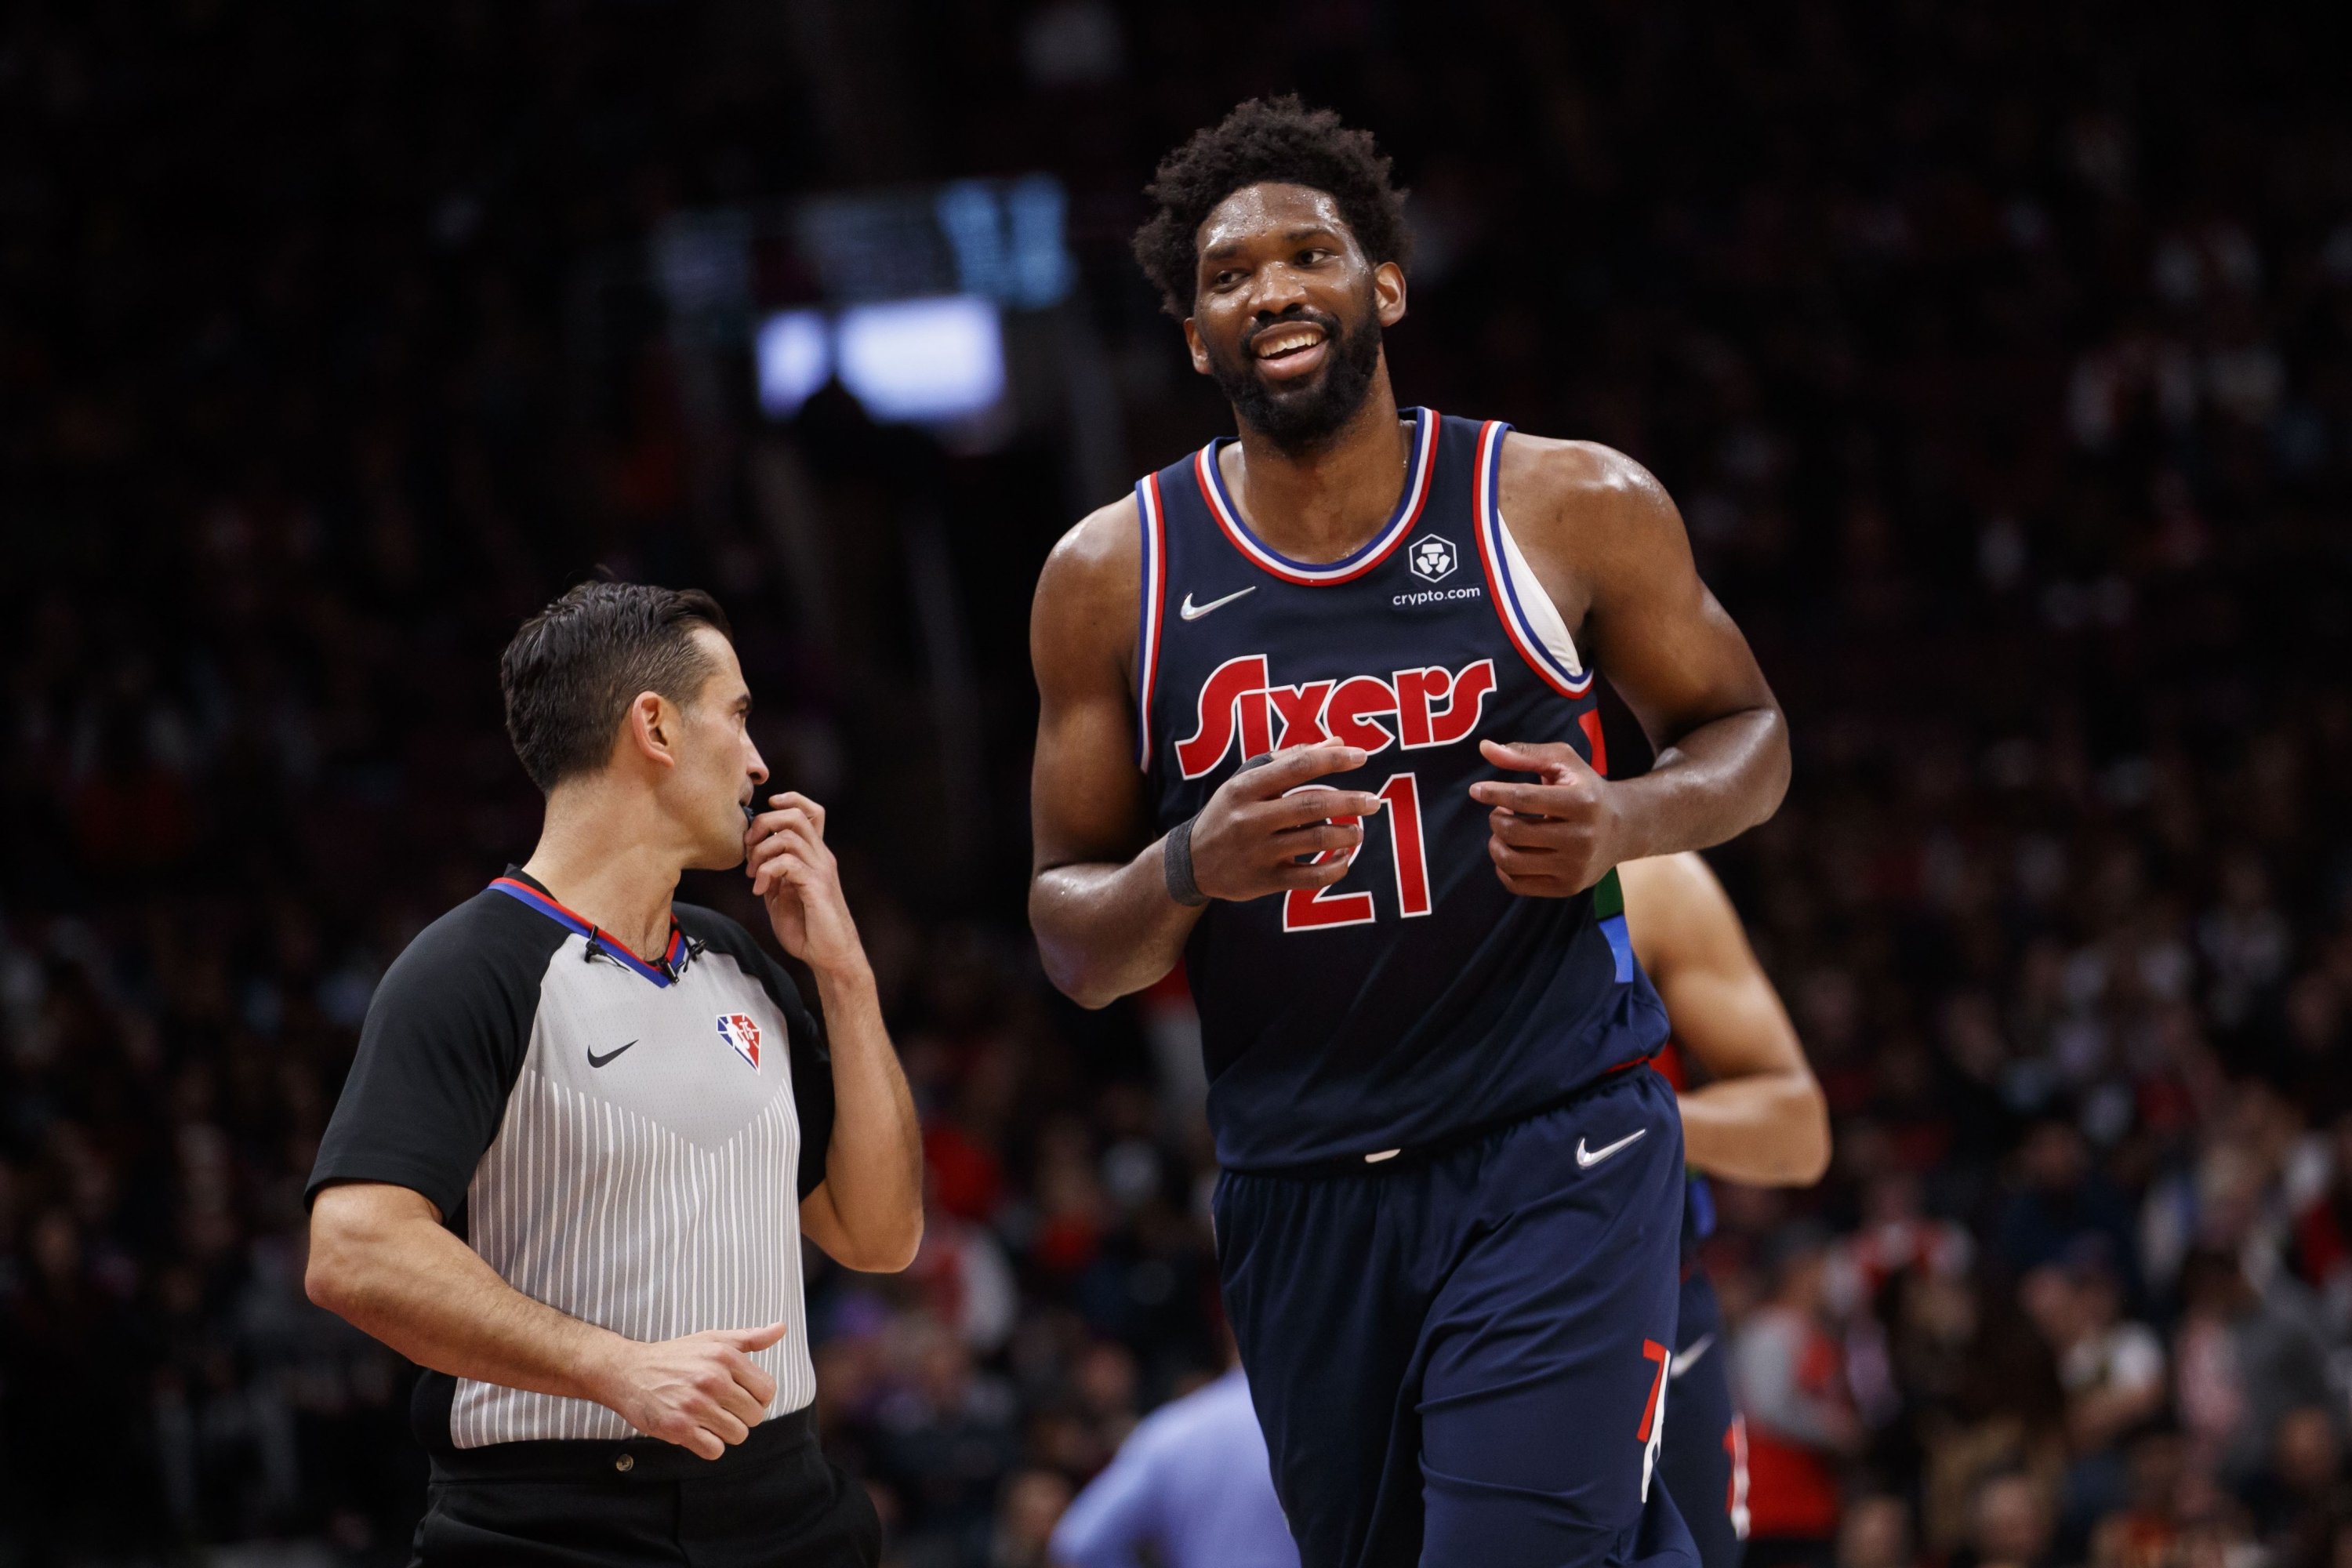 Sixers' Joel Embiid smiles during an NBA playoffs game against the Toronto Raptors, Toronto, Canada, April 28, 2022.